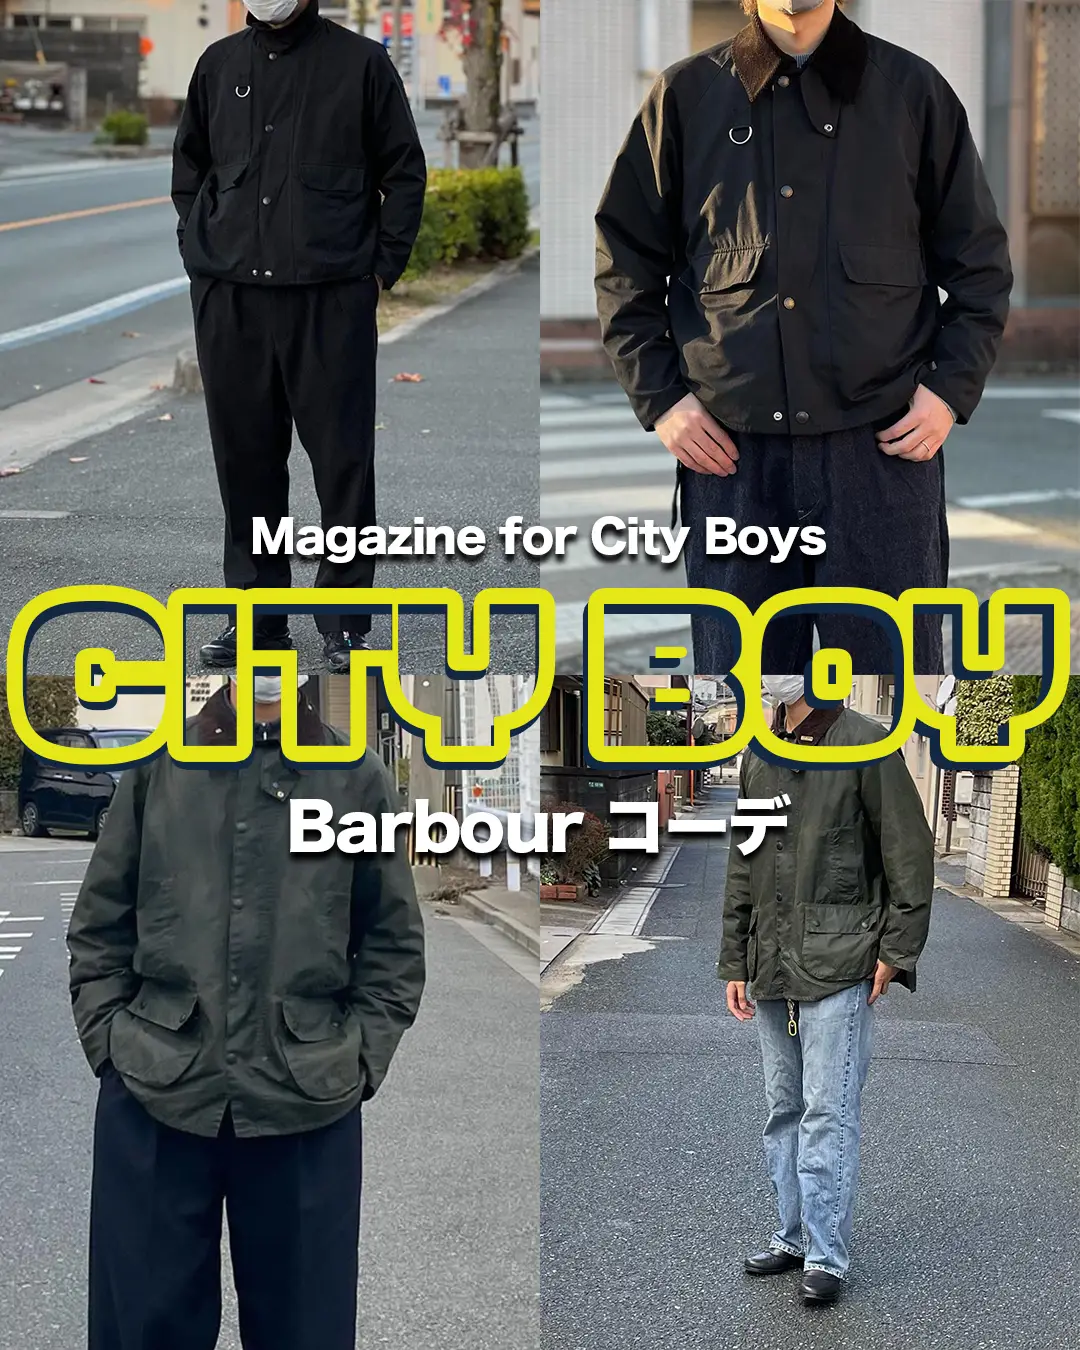 CITYBOY Baber Corde | Gallery posted by メゾン七つ道具 | 革小物